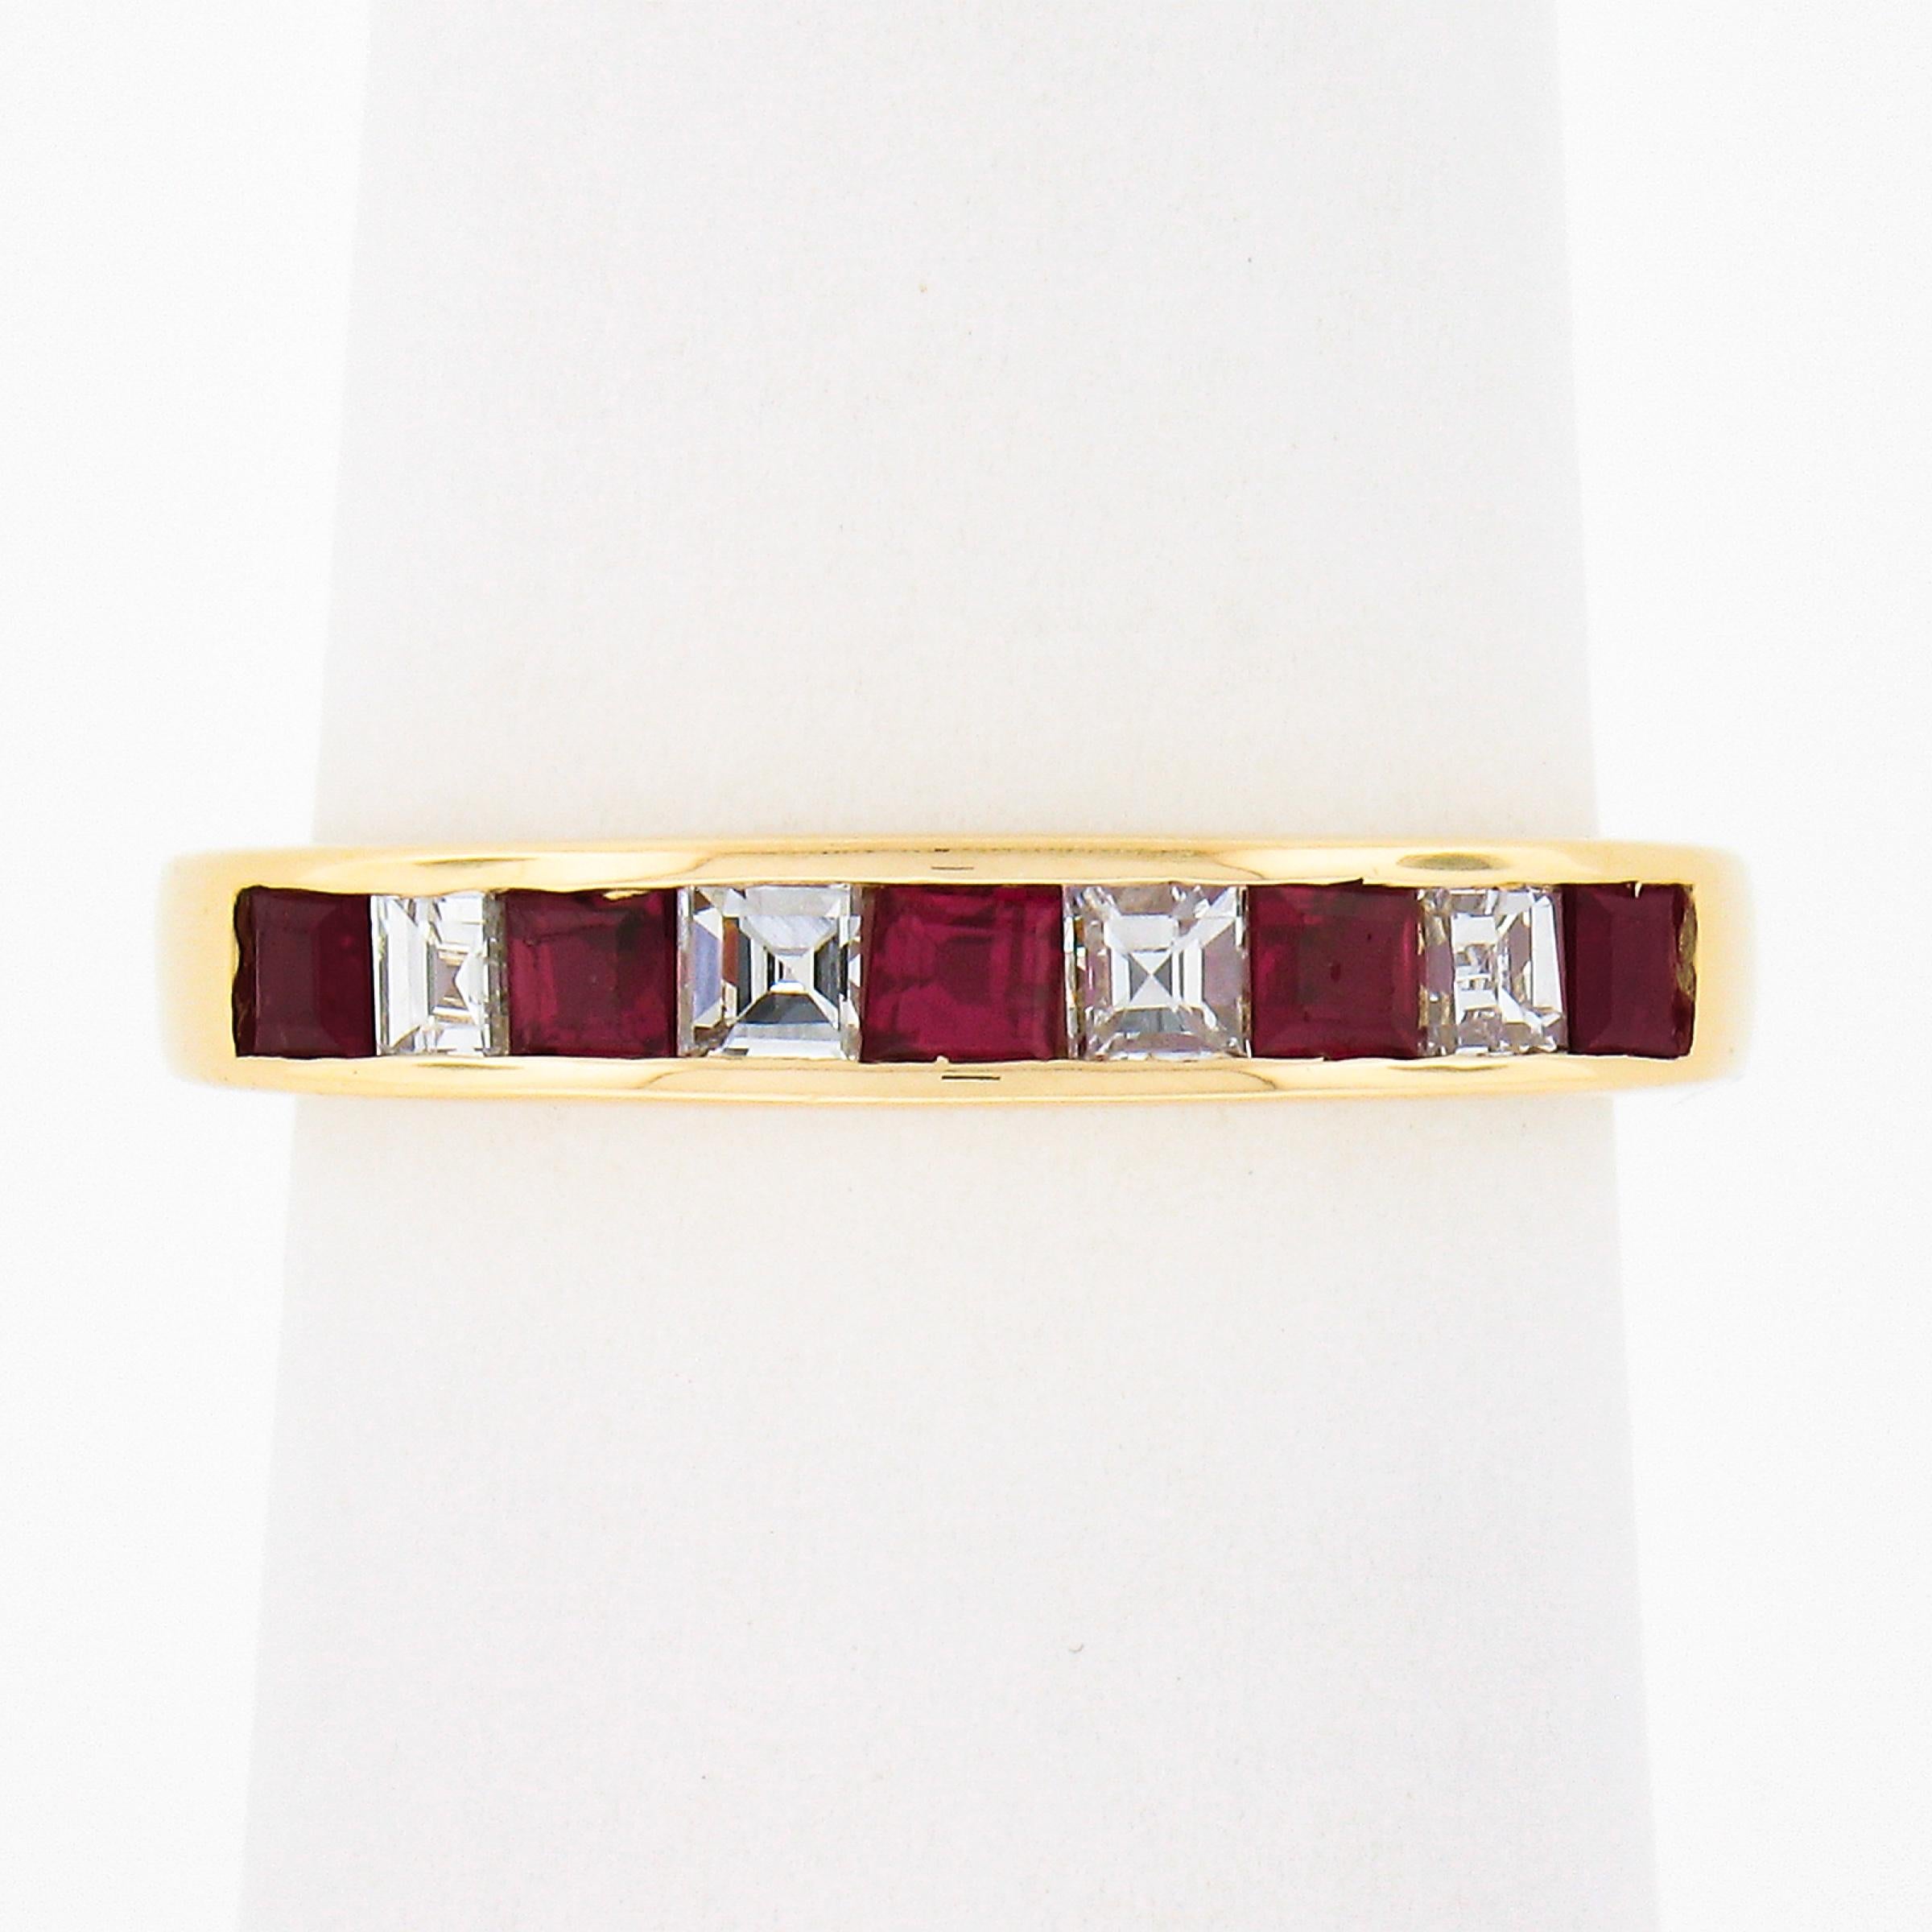 This stunning, HIGH QUALITY, ruby and diamond band ring is crafted in solid 18k yellow gold and elegantly carries the stones in an alternating pattern across its top in secure channel settings. The 5 ruby gemstones are square step cut and are very